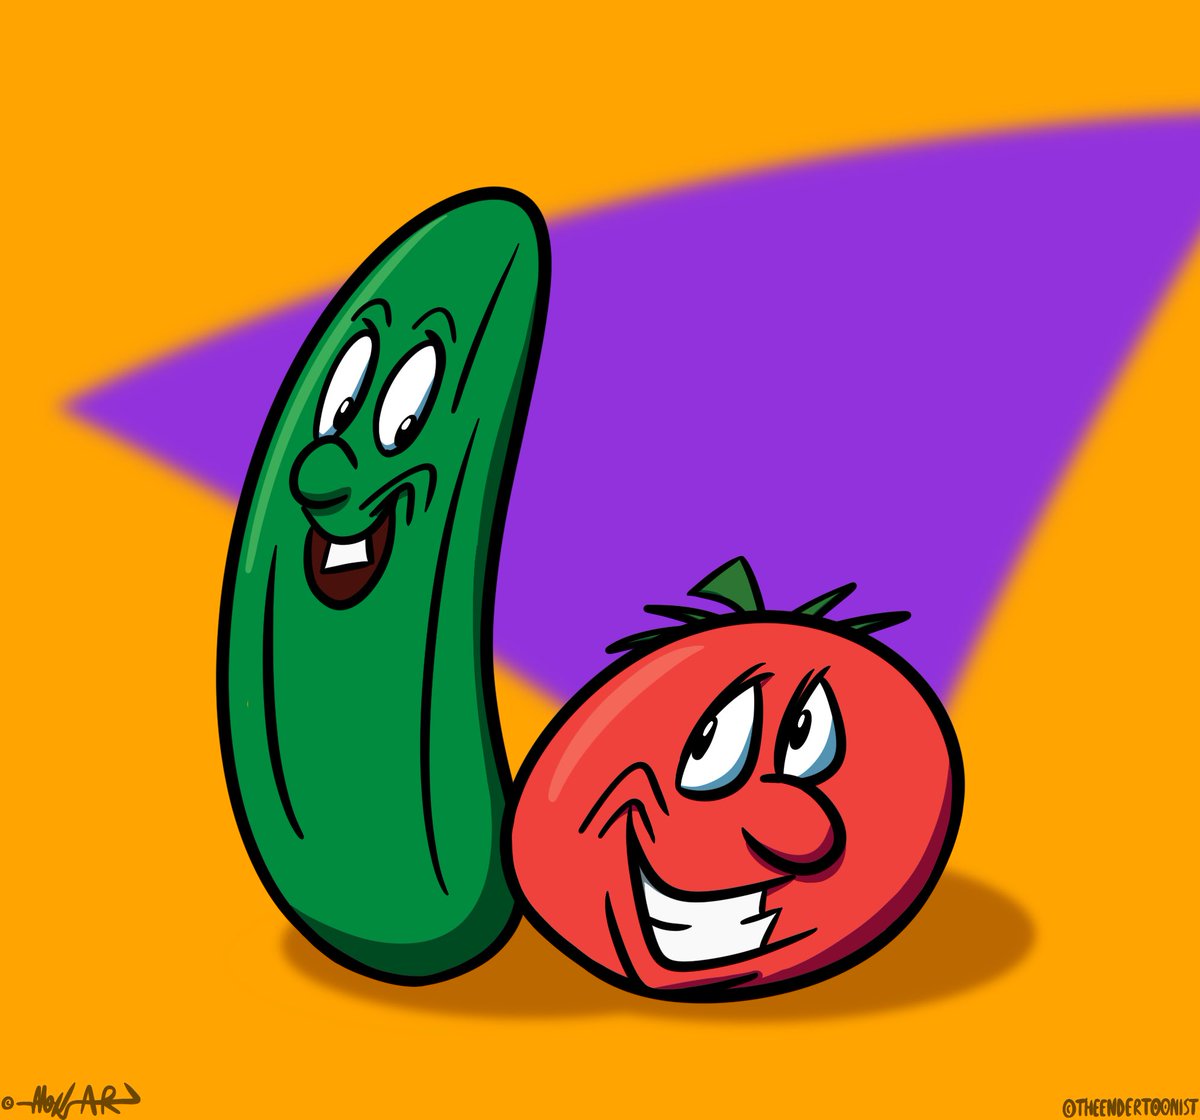 ~[Fan Art Friday] - Larry And Bob~

This #fanartfriday, I drew Larry and Bob, both taken from a childhood Christian series I watched, called VeggieTales.

#cartooncharacters #cartoonart #veggies #veggietales #fanart #digitalart